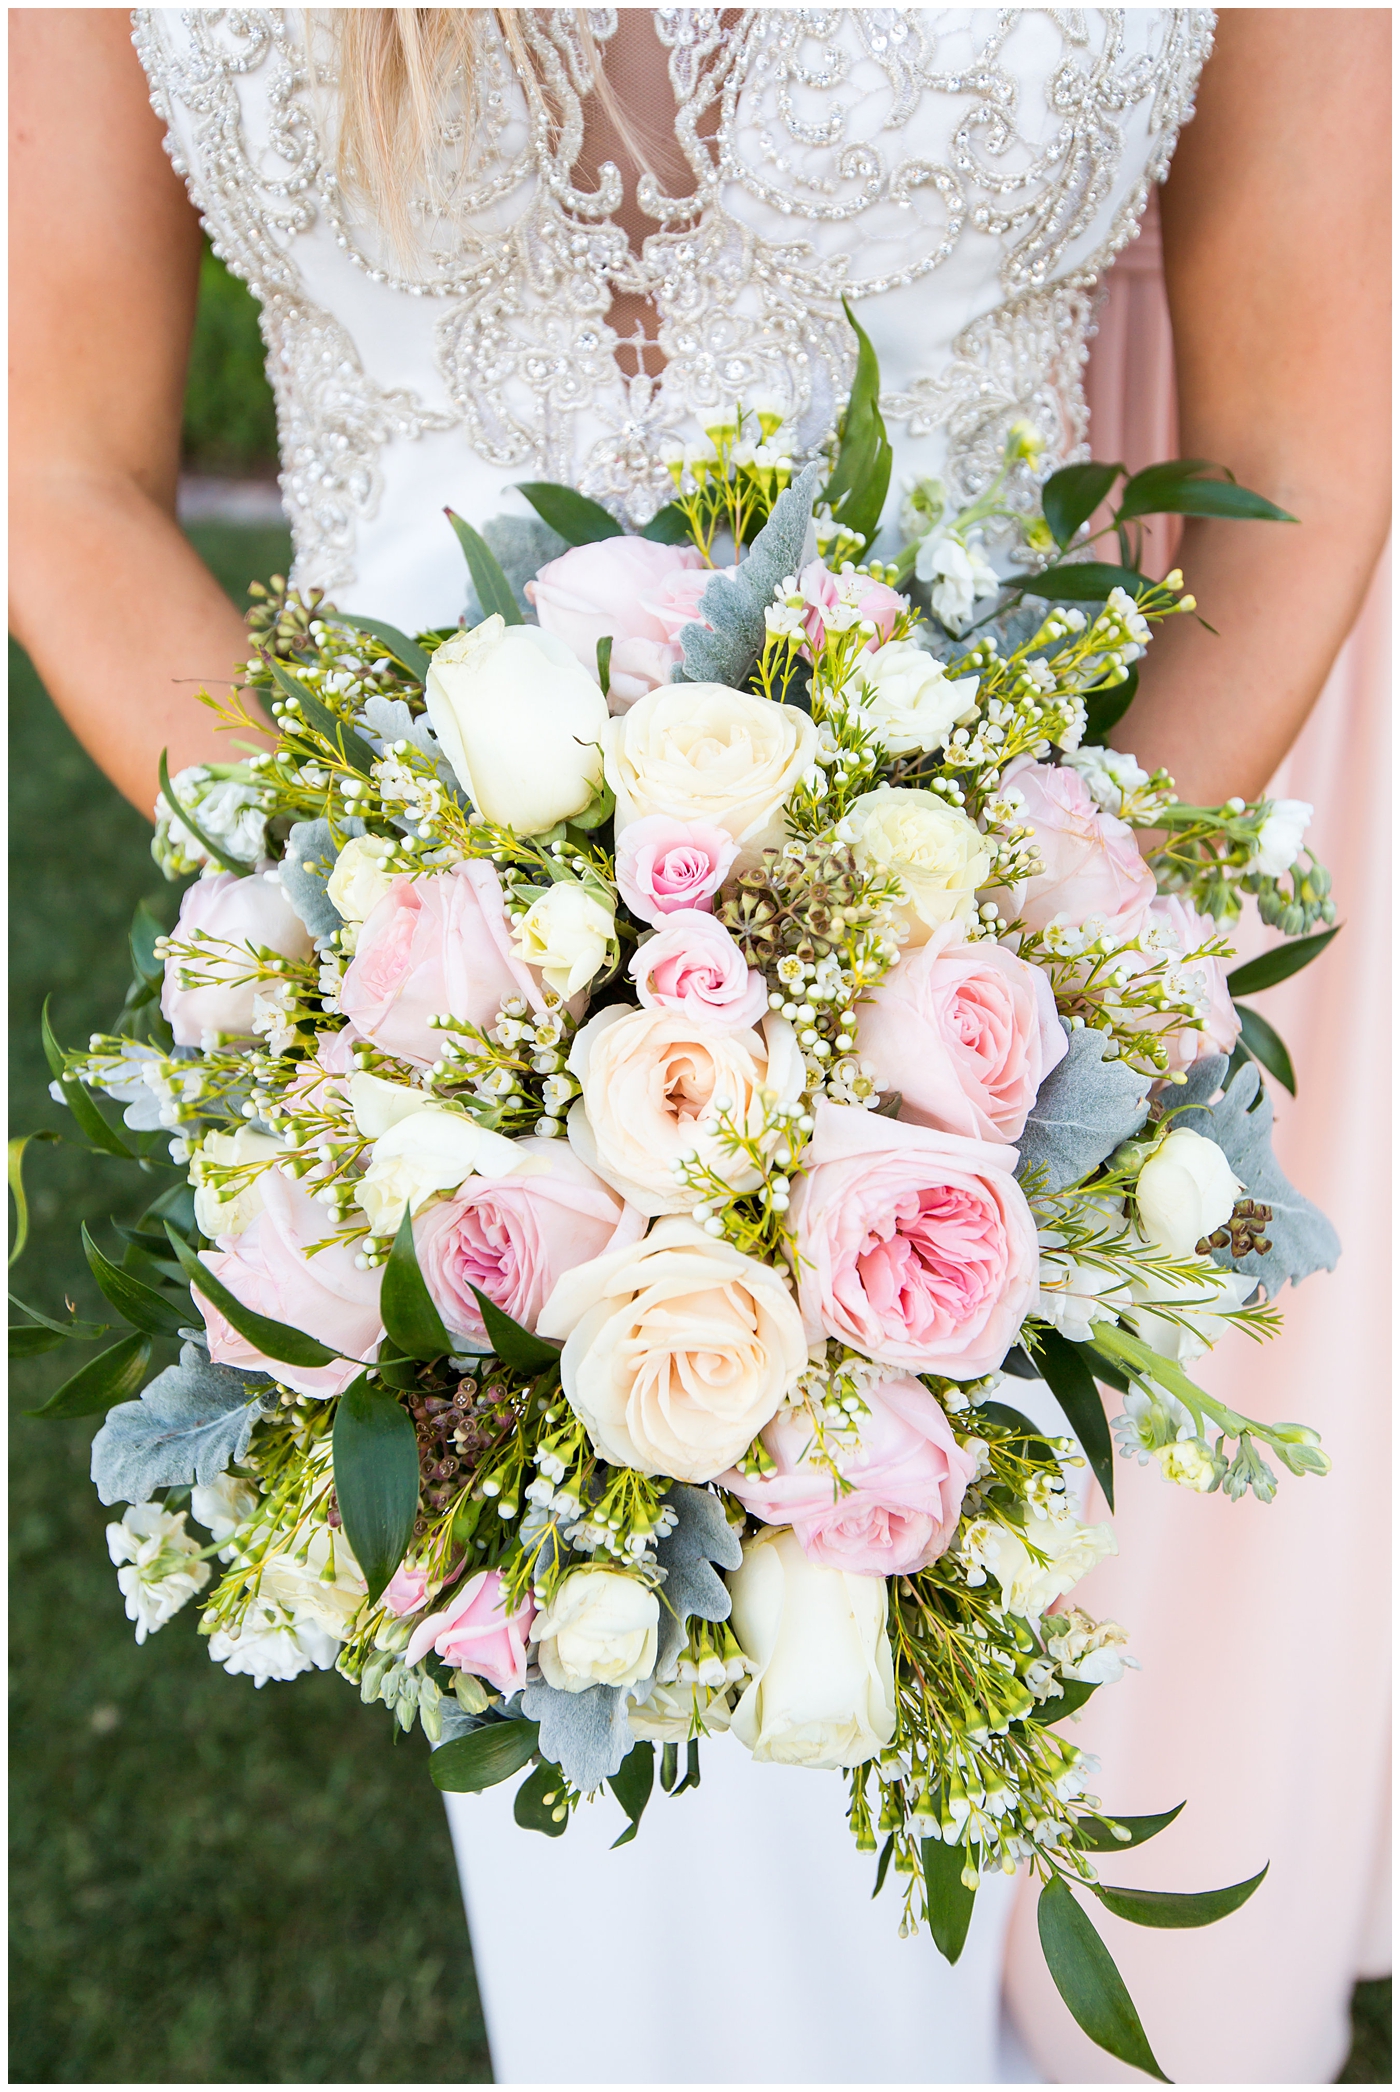 organic blush, white and greenery bouquet with roses wedding day bouquet